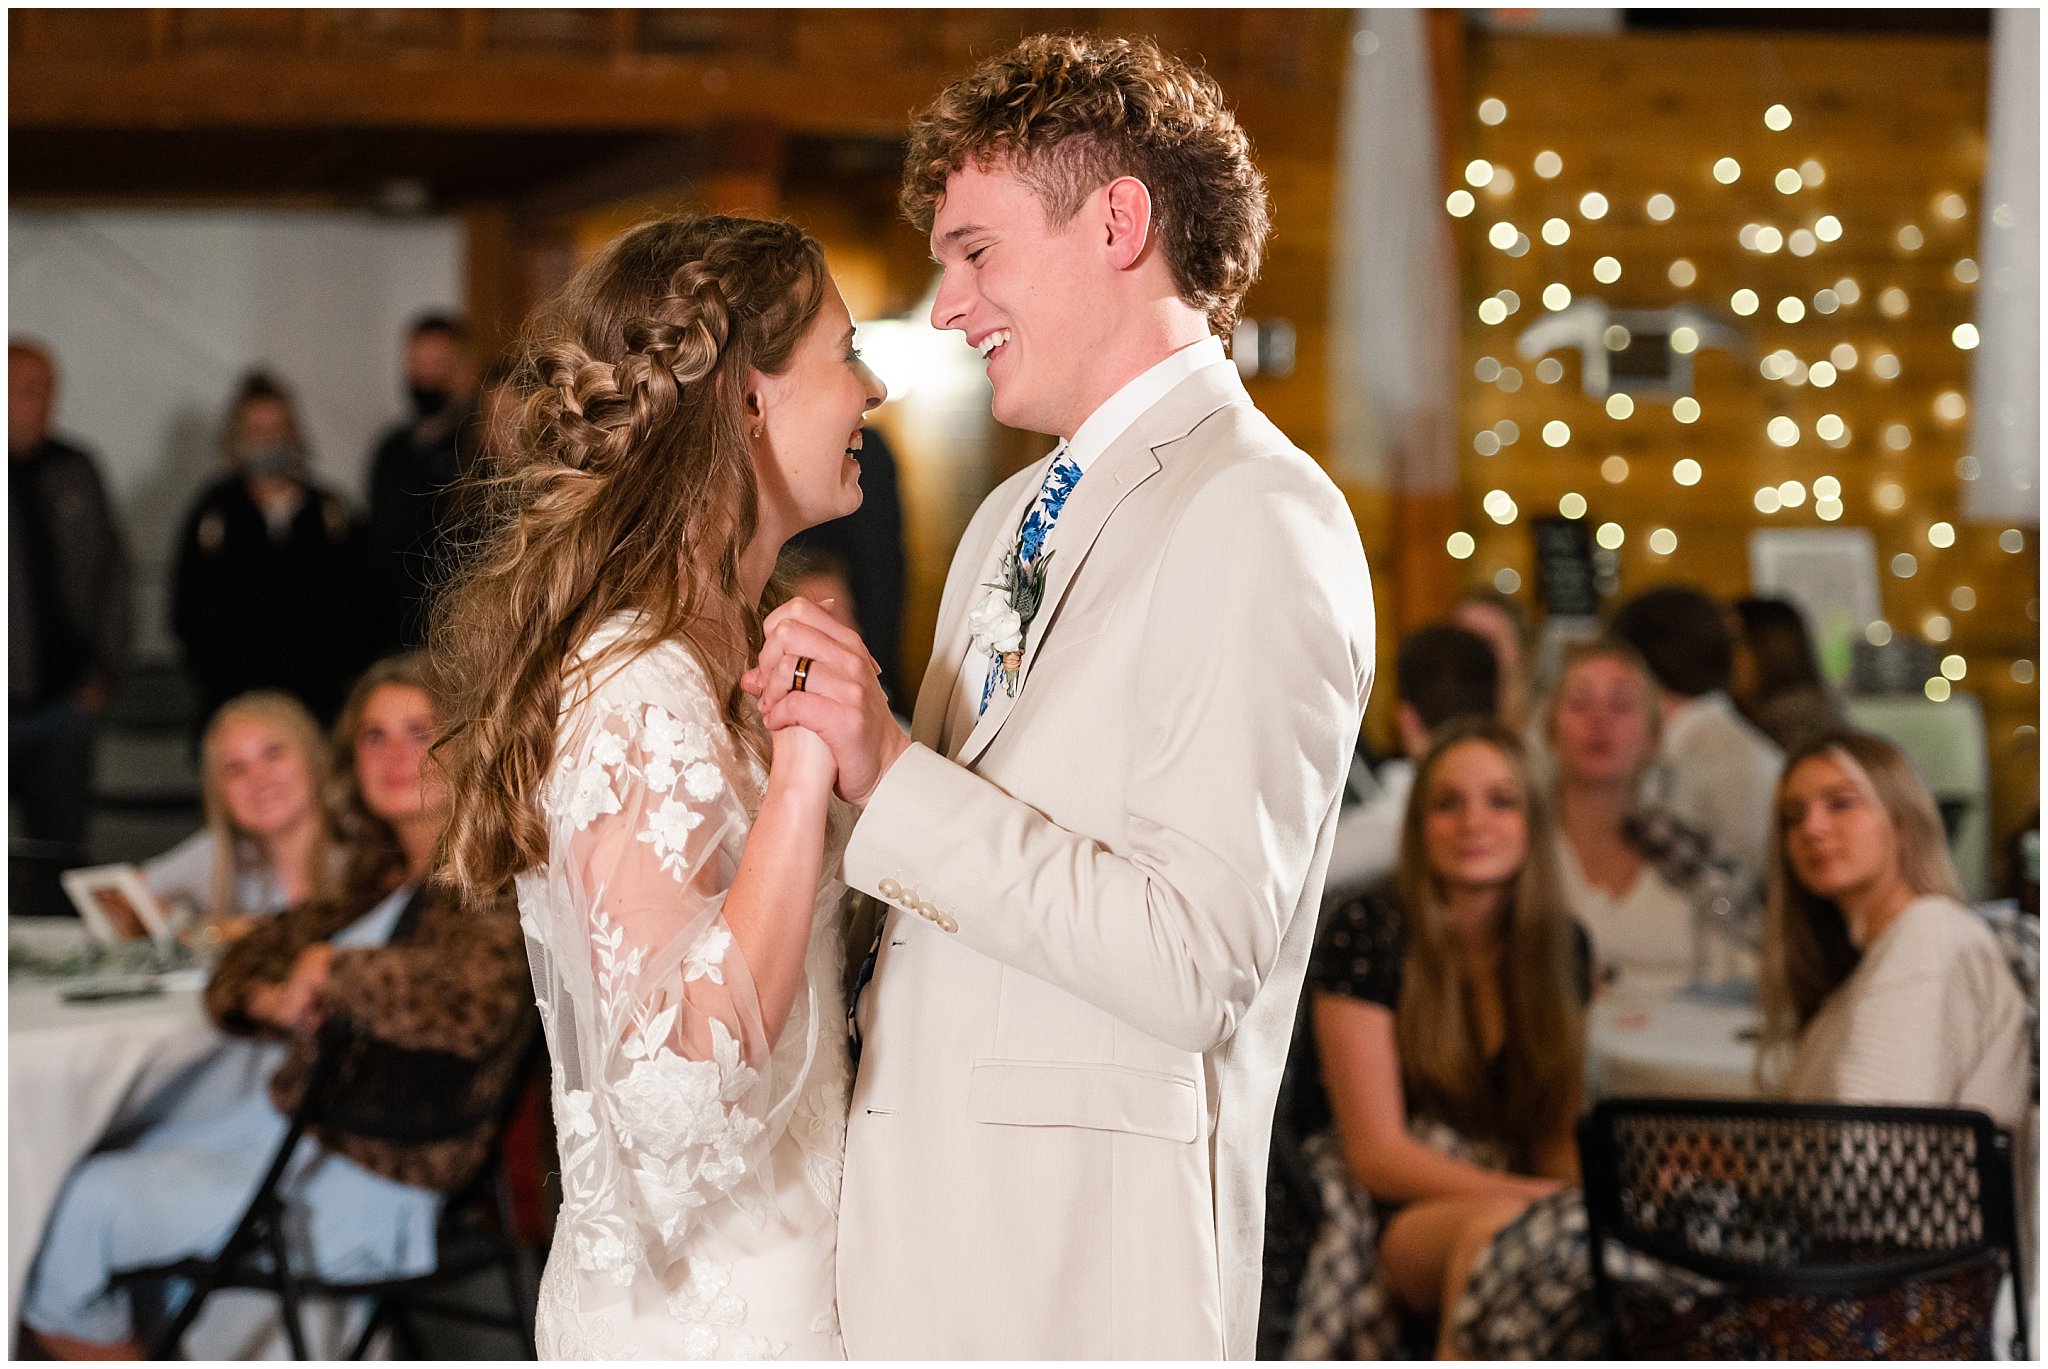 Bride and groom share first dance at their reception. Groom in cream colored suit with blue floral tie and bride in lace detailed wedding dress | Oquirrh Mountain Temple and Draper Day Barn Winter Wedding | Jessie and Dallin Photography